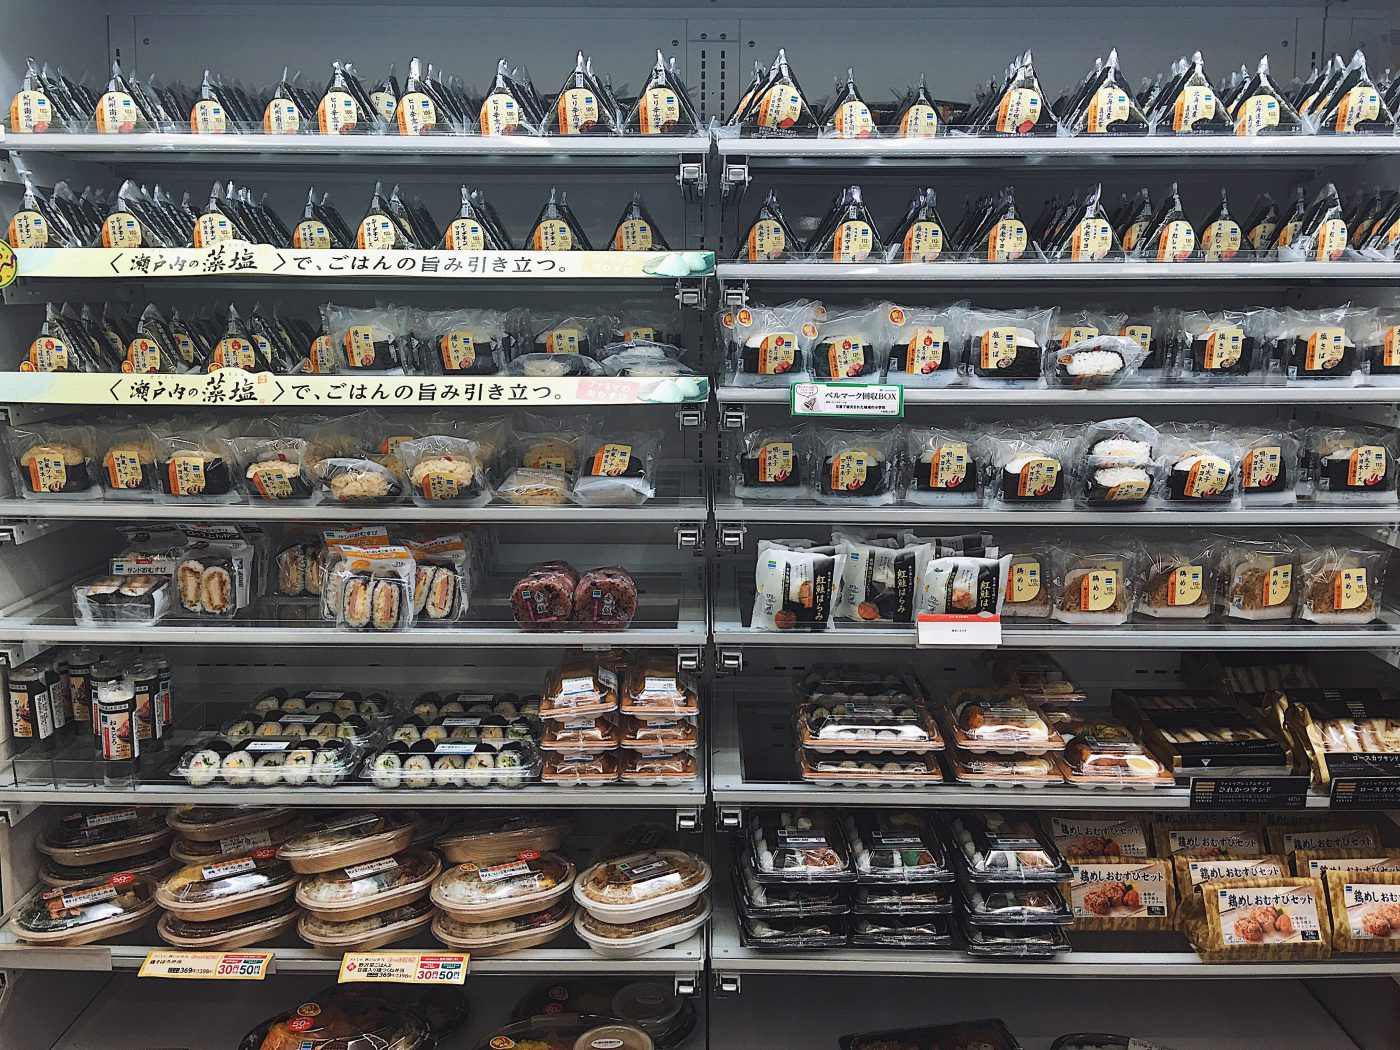 Rows of neatly stacked Onigiri - my personal heaven